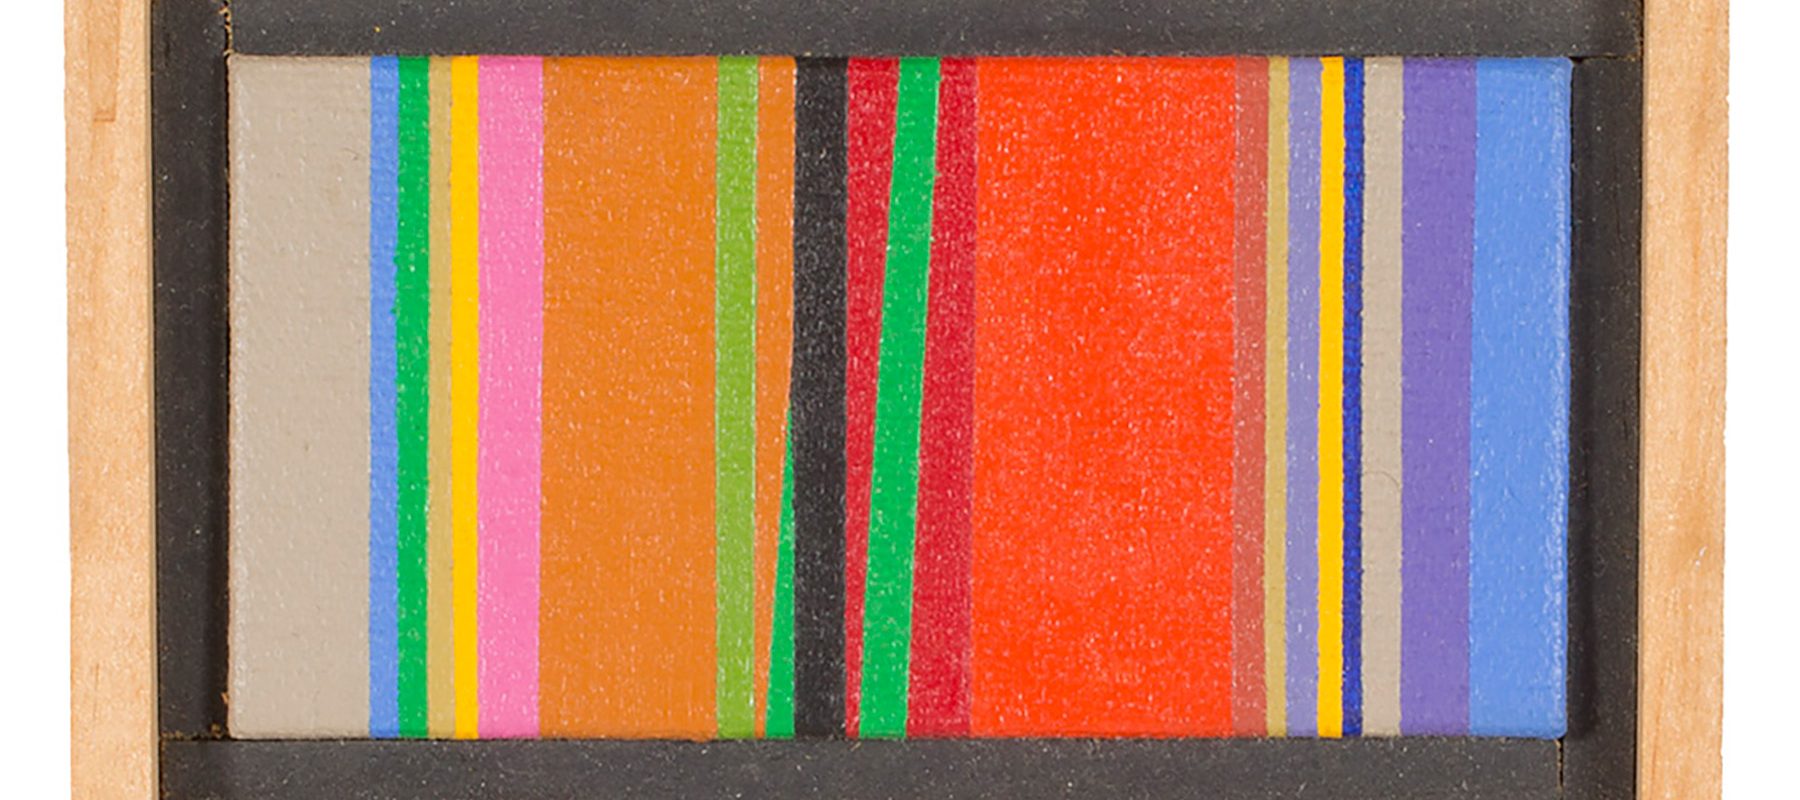 Varying colors of vertical stripes make up this short, wide painting.